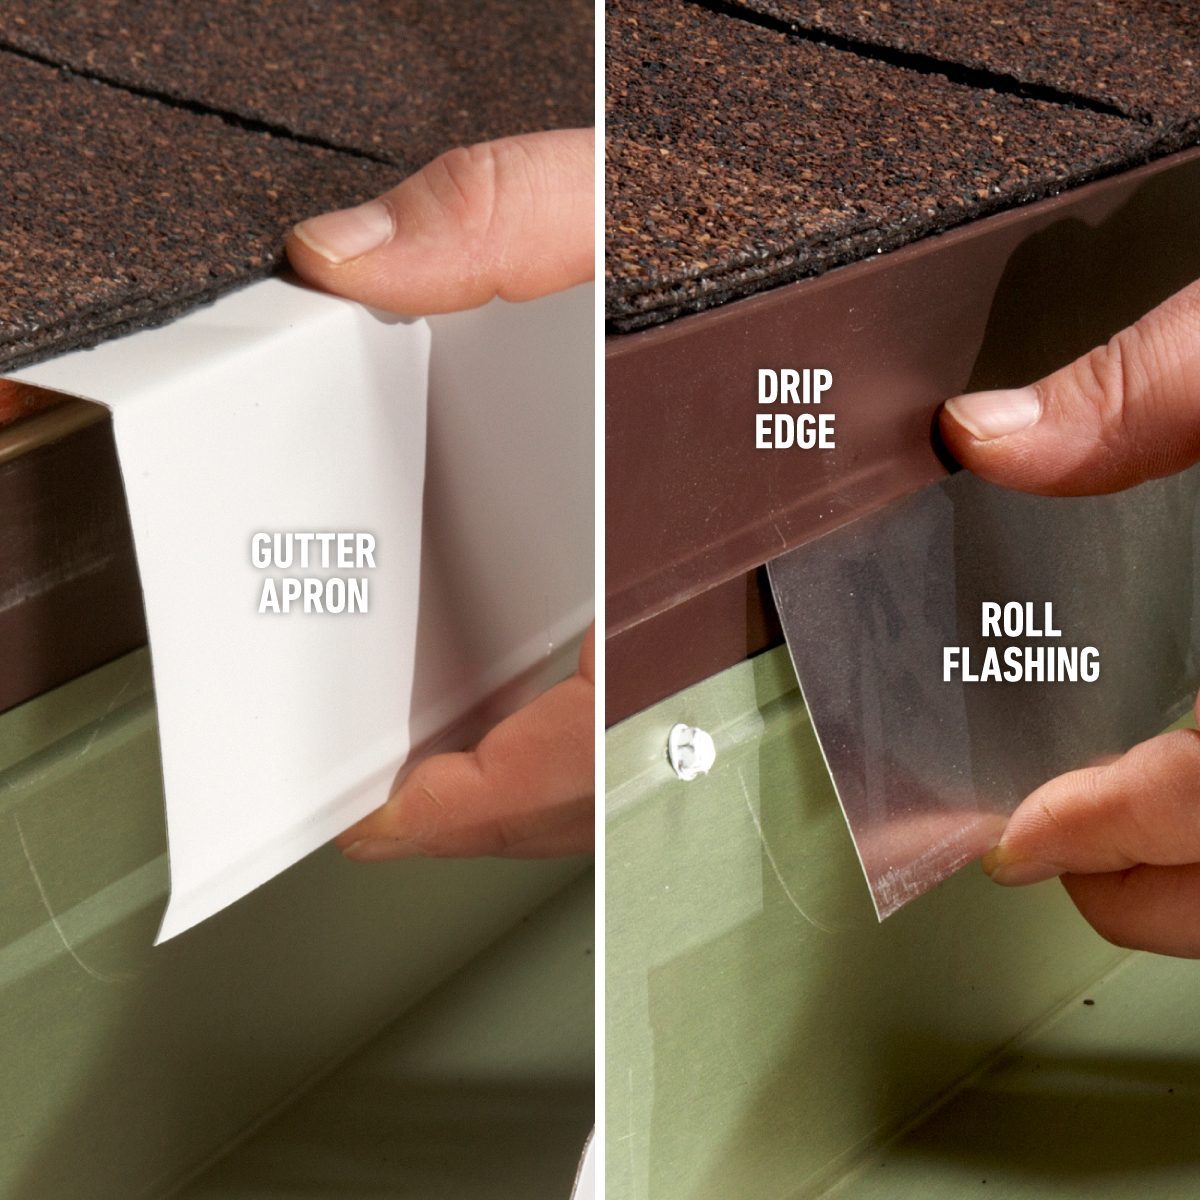 Easy Gutter Fixes You Can Diy Stop Water Getting Behind Gutters Fix the Gap Between the Gutter and Drip Edge